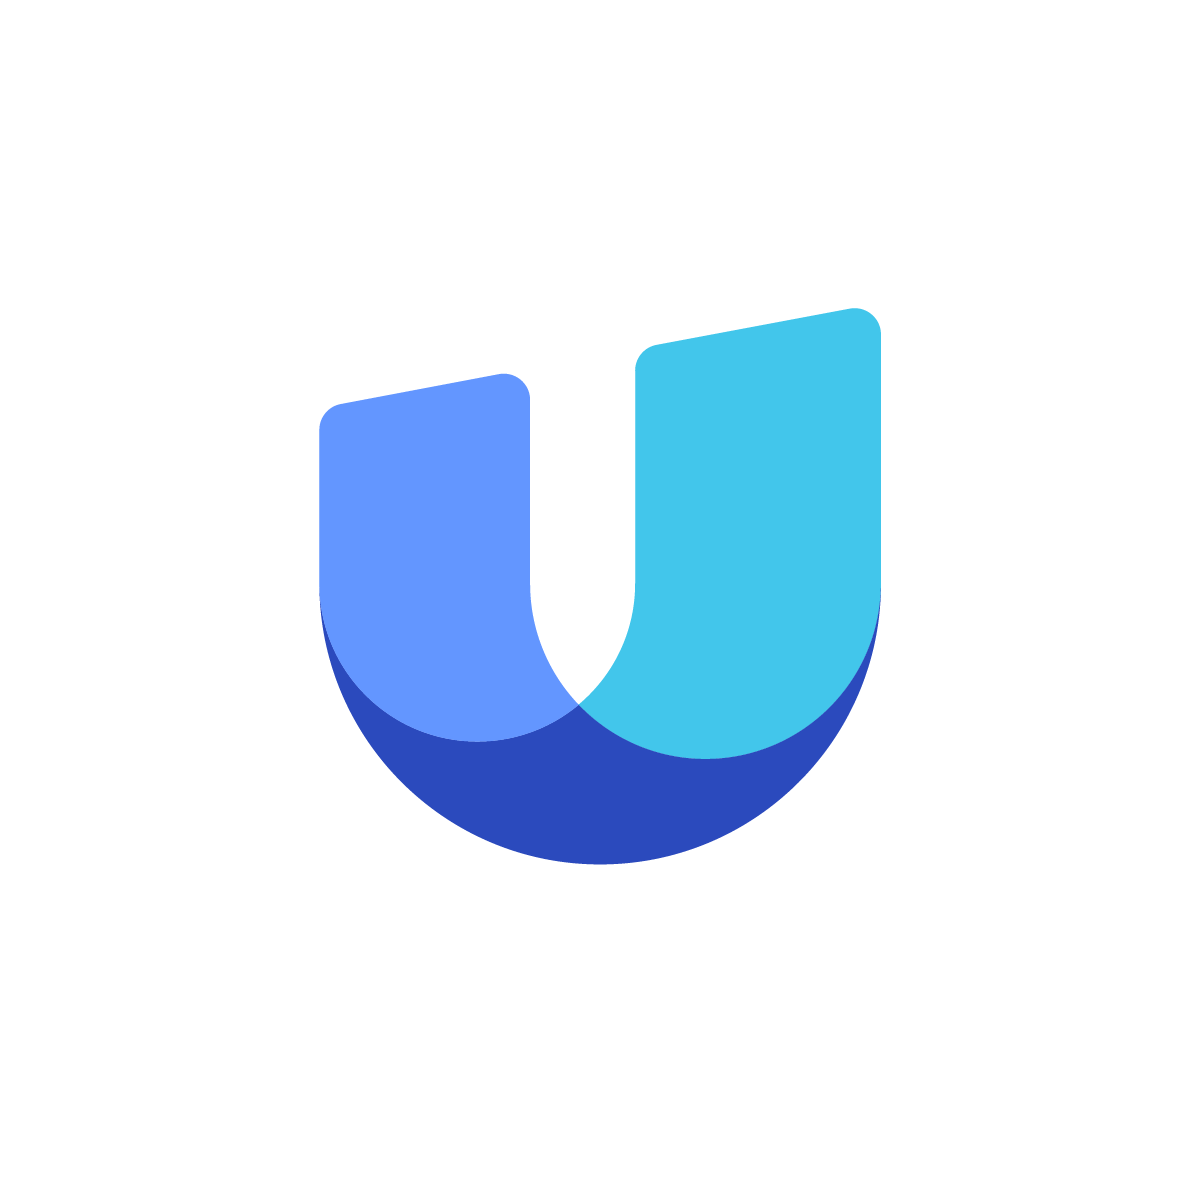 Abstract U logo elegantly combines overlaying parts to shape the letter 'U,' symbolizing collaboration, inclusivity, and shared vision